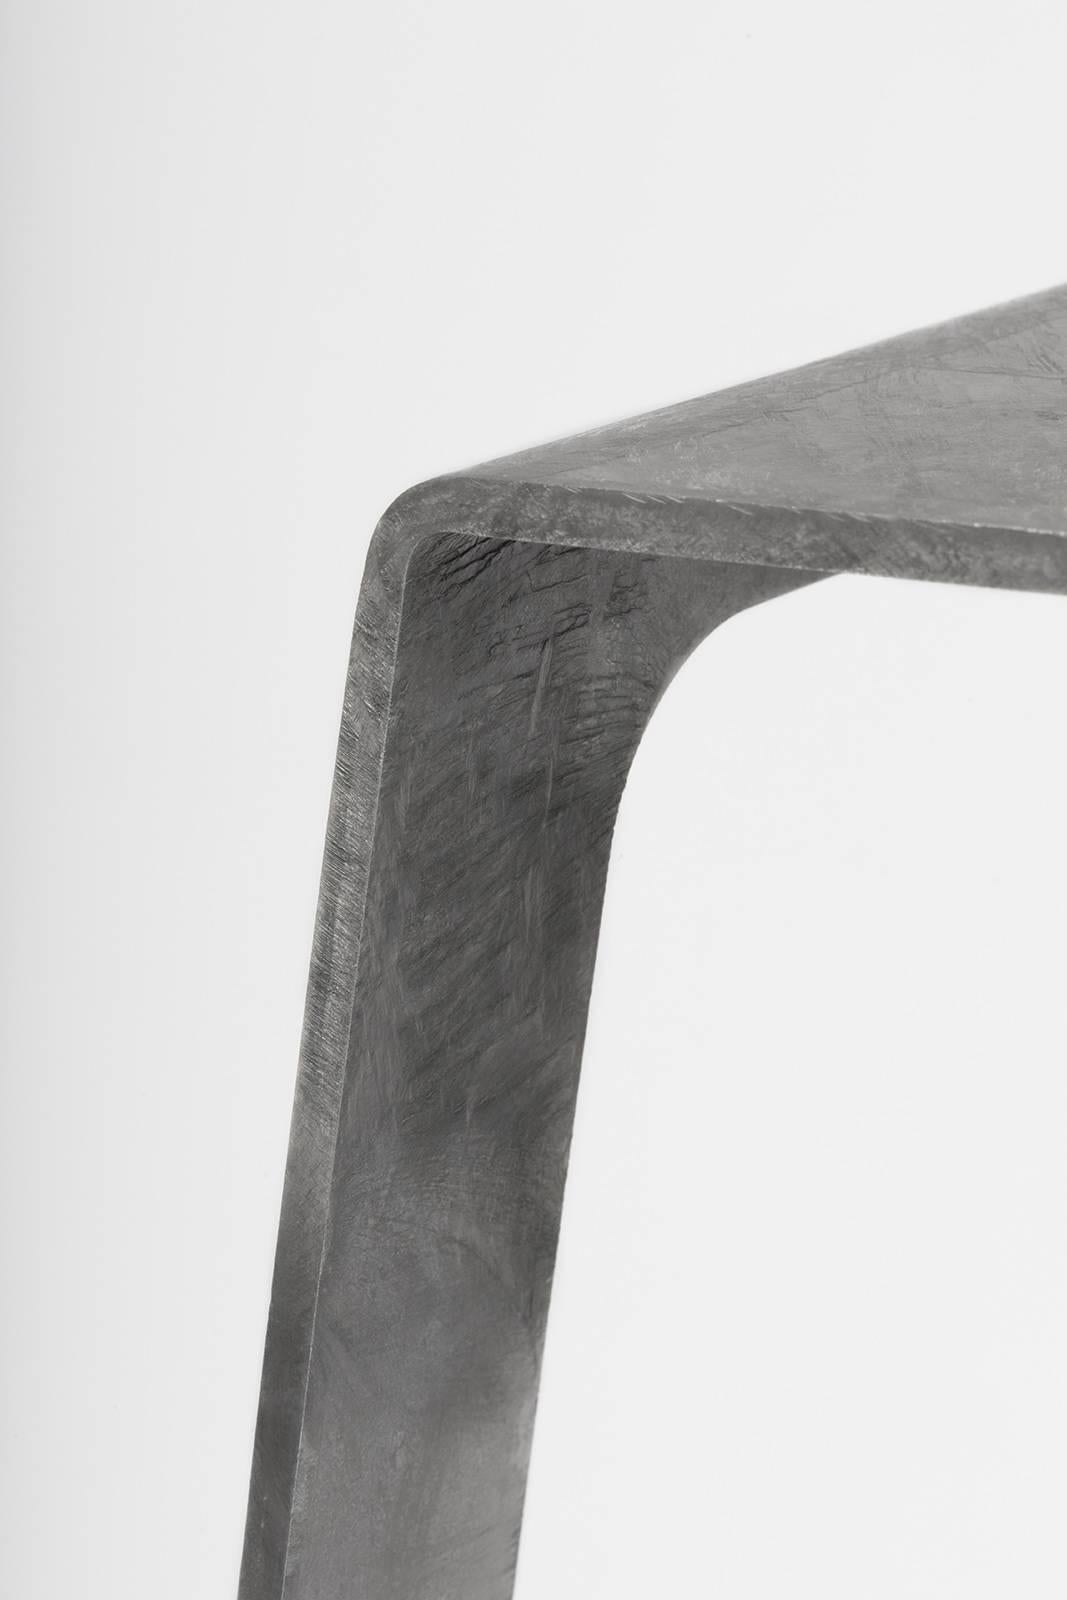 A_Stool bar height stool in hot-dipped galvanized steel. A minimal, backless design in steel with a durable coating of zinc. Also available in brushed, sanded, or polished finish. Signed, dated and numbered to the underside with a laser-etched